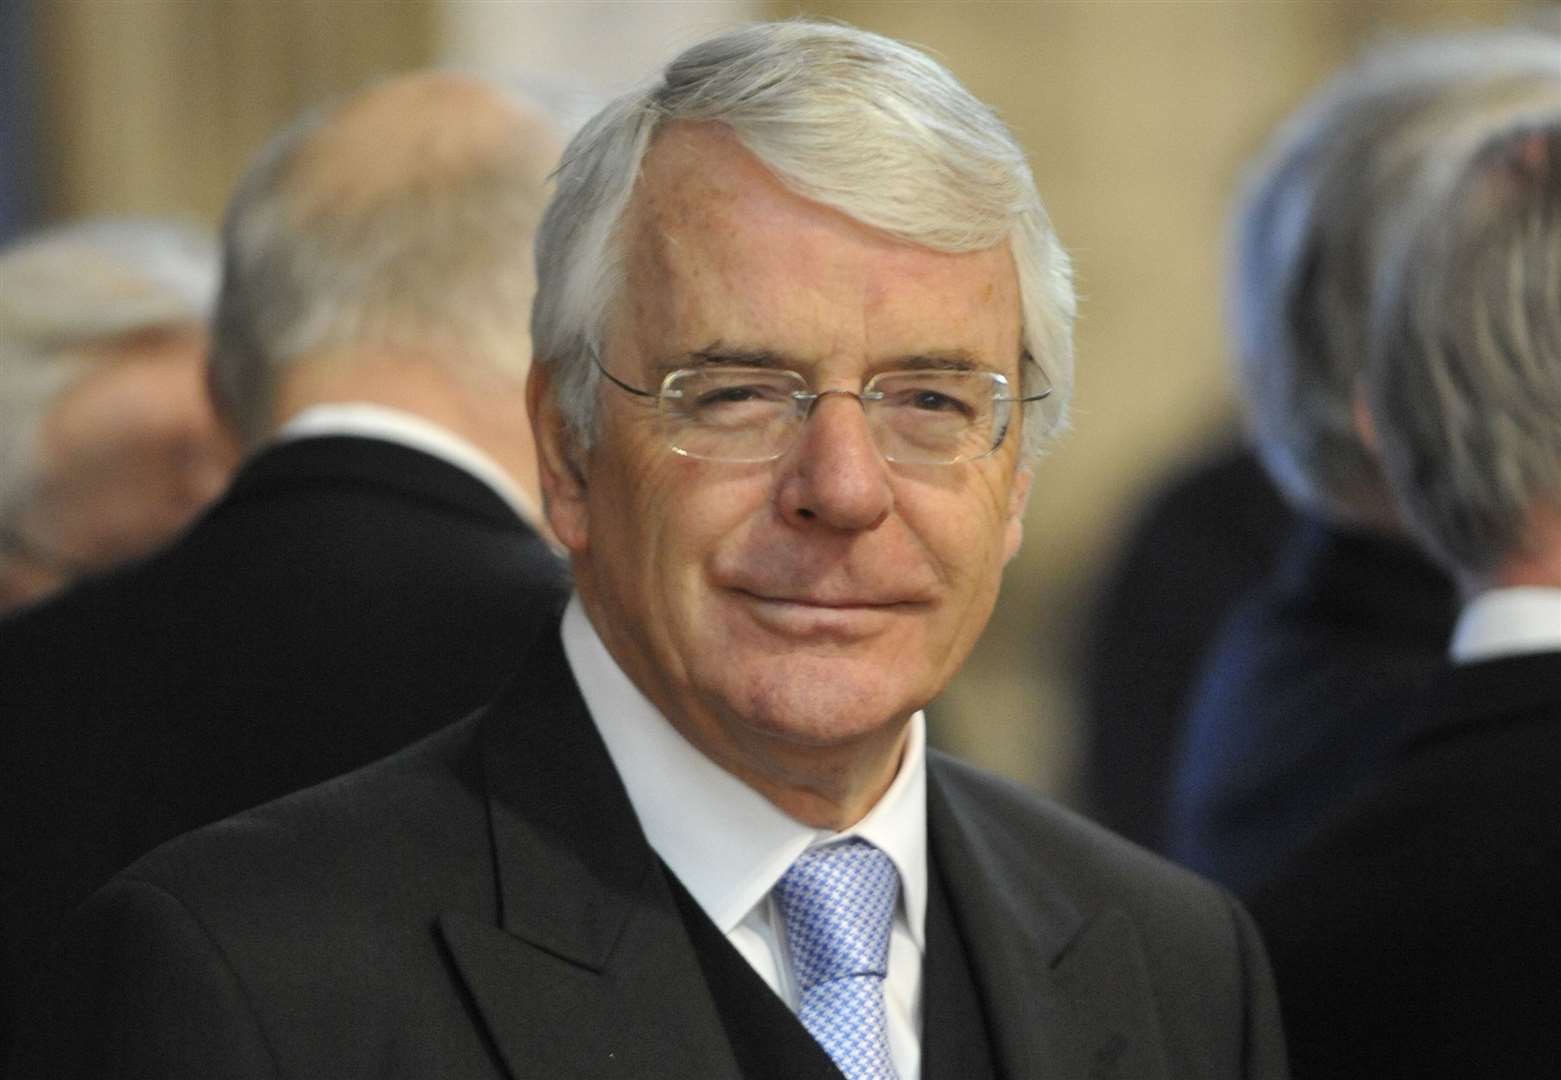 Former Prime Minister John Major’s government introduced Ofsted inspections in 1992